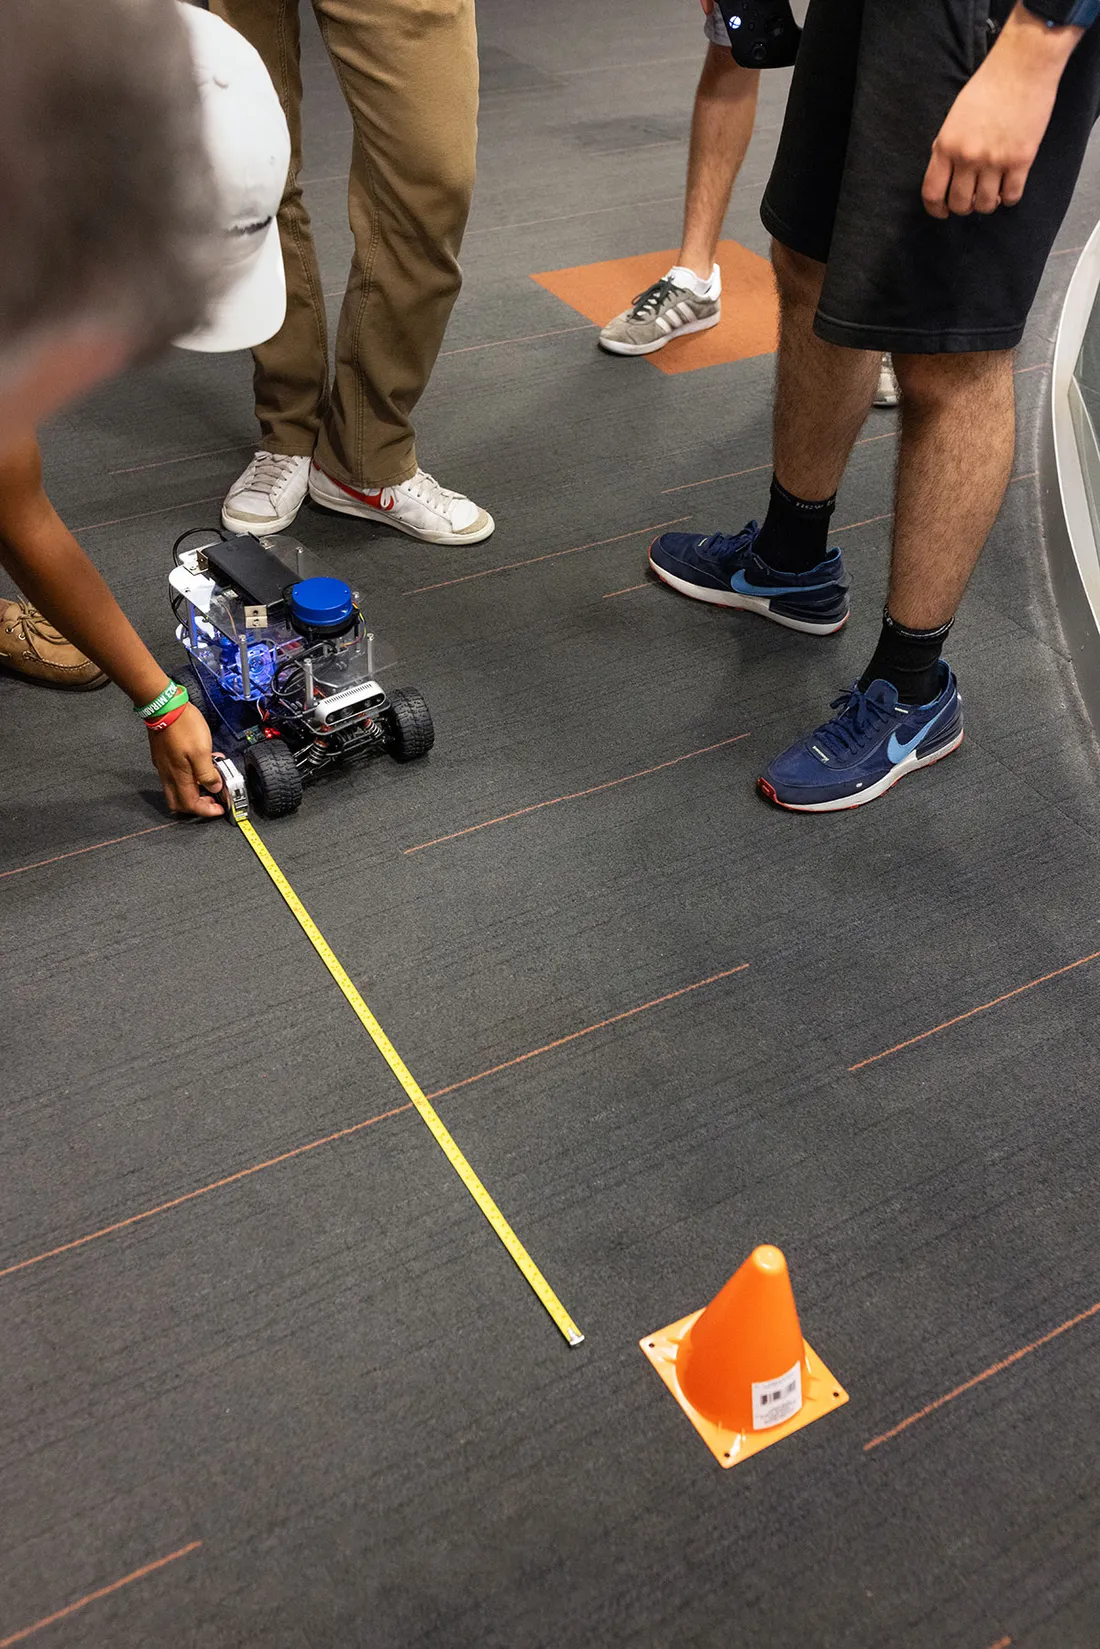 Students measure distance between AI robotic car and cone.